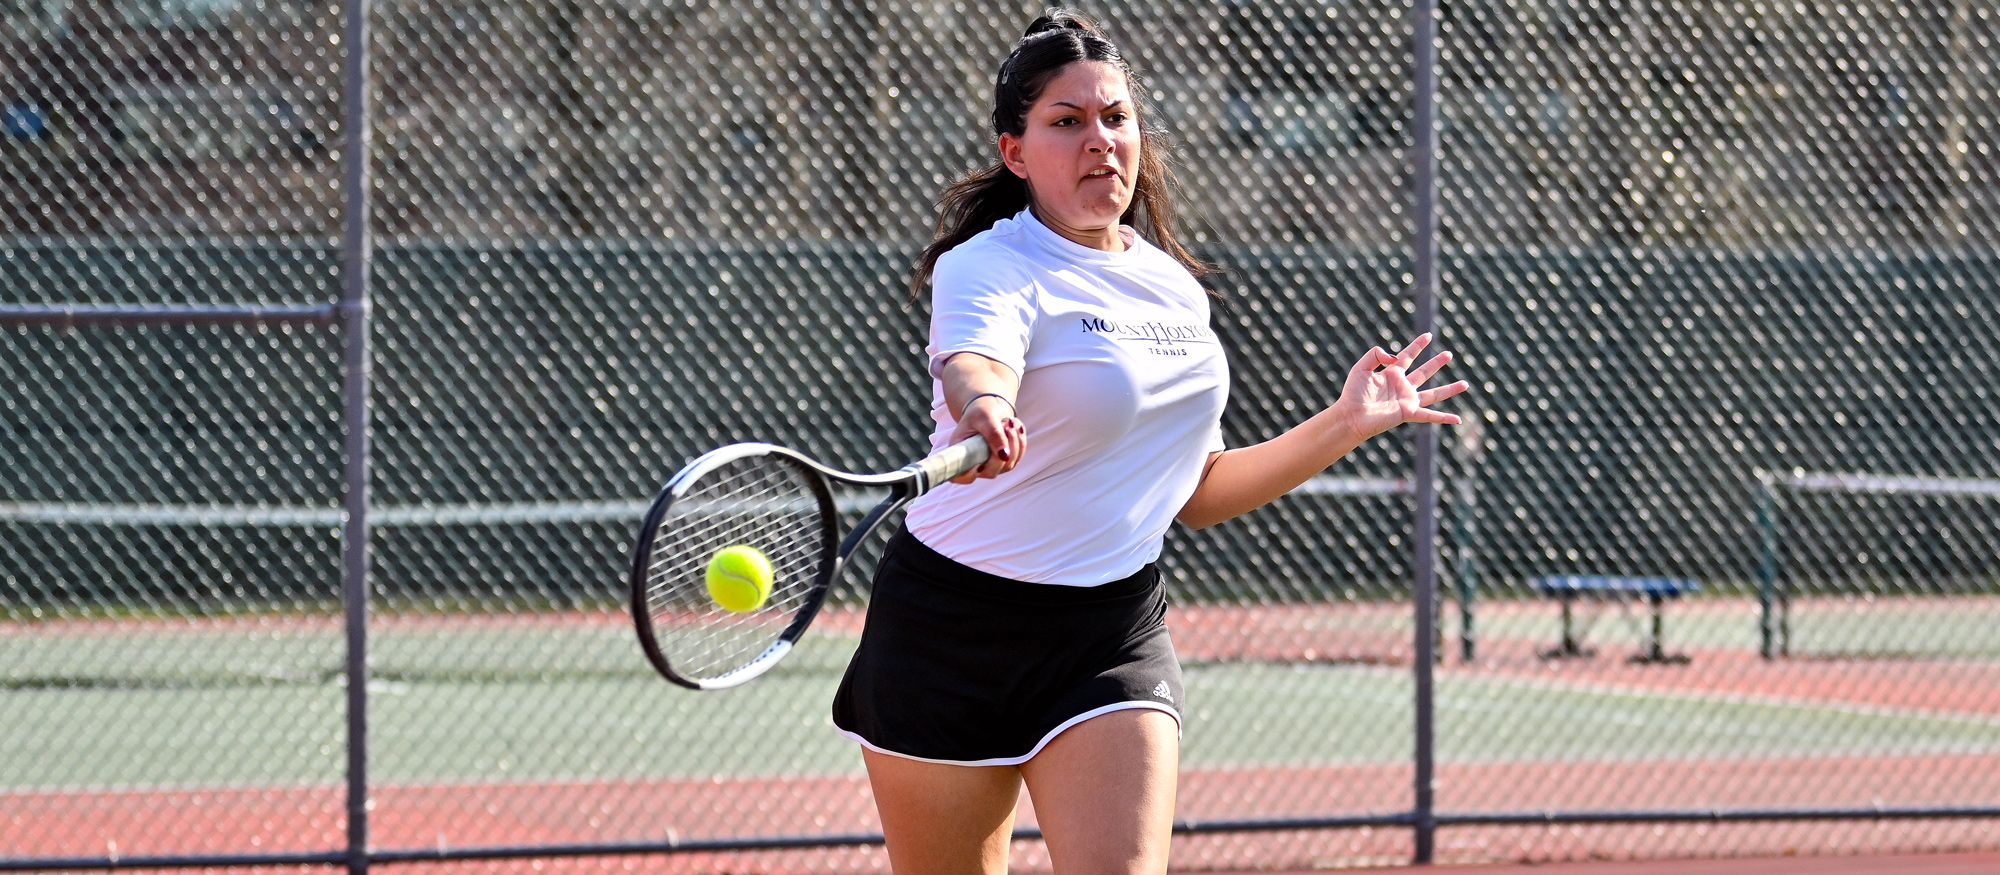 Jaskirat Kaur fell 8-2 at first doubles and 6-0, 6-3 at second singles in Mount Holyoke's 9-0 loss at No. 3 nationally ranked MIT on April 8, 2023. (RJB Sports file photo)